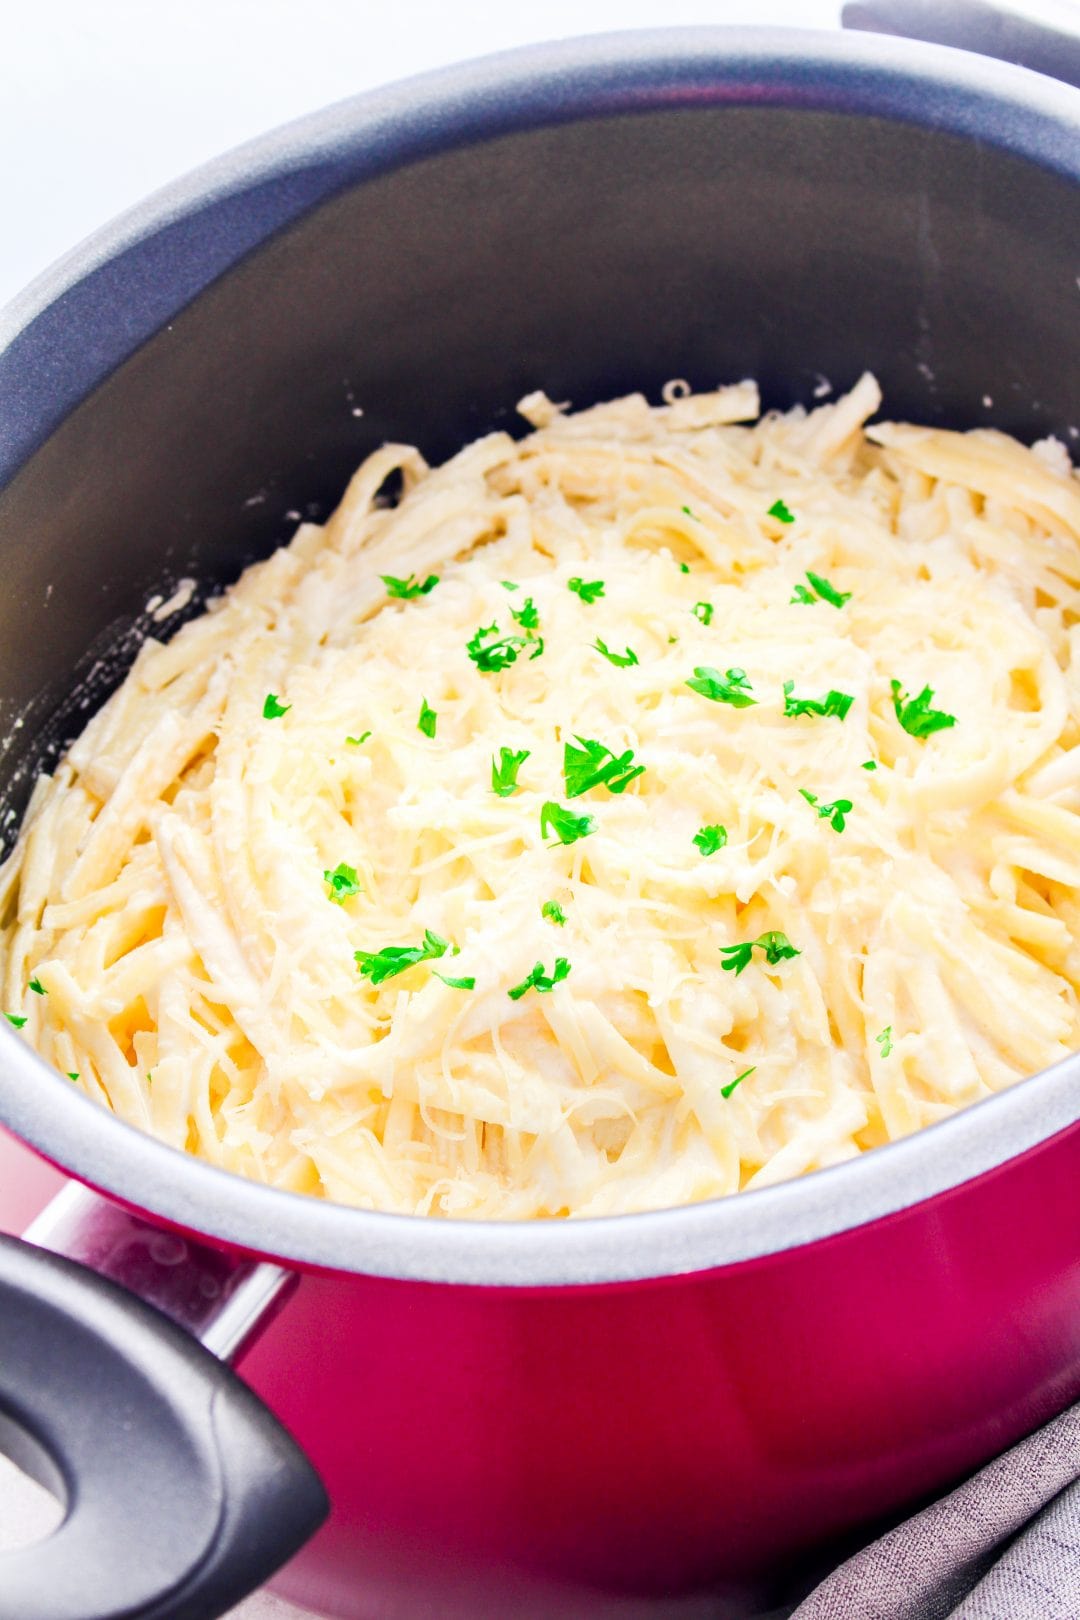 Homemade Alfredo Sauce - 3 simple ingredients and easy to make!